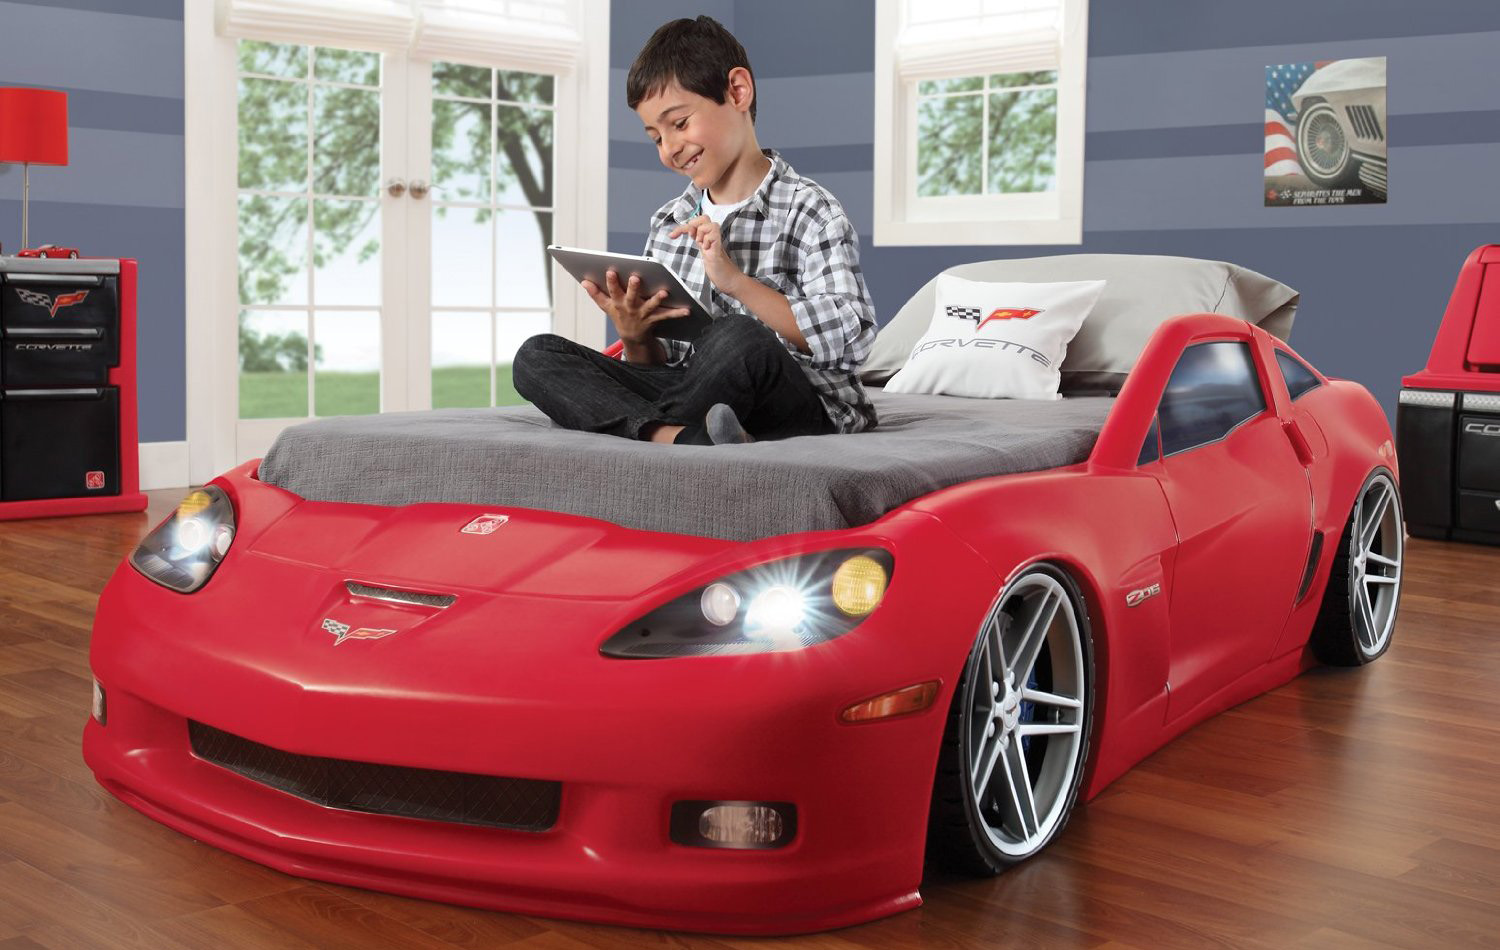 Corvette Bed with Lights